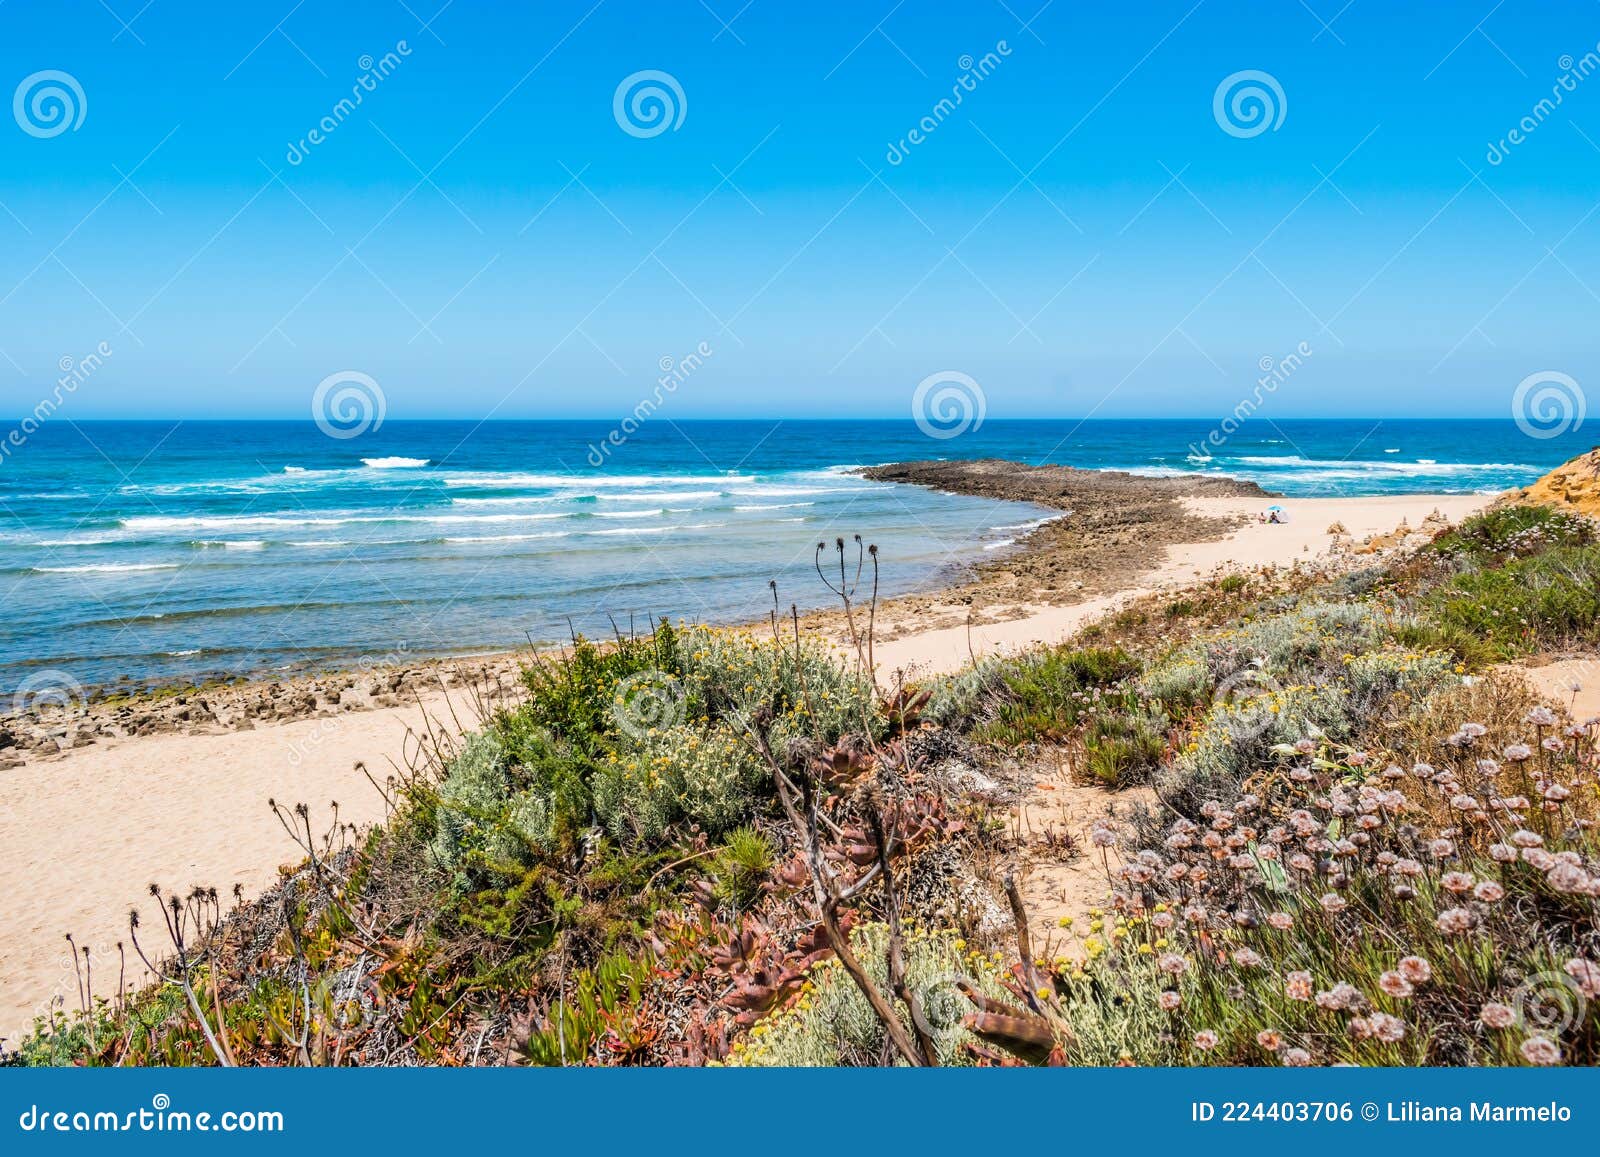 selective focus on maritime vegetation in the dunes of farol beach in milfontes, odemira portugal